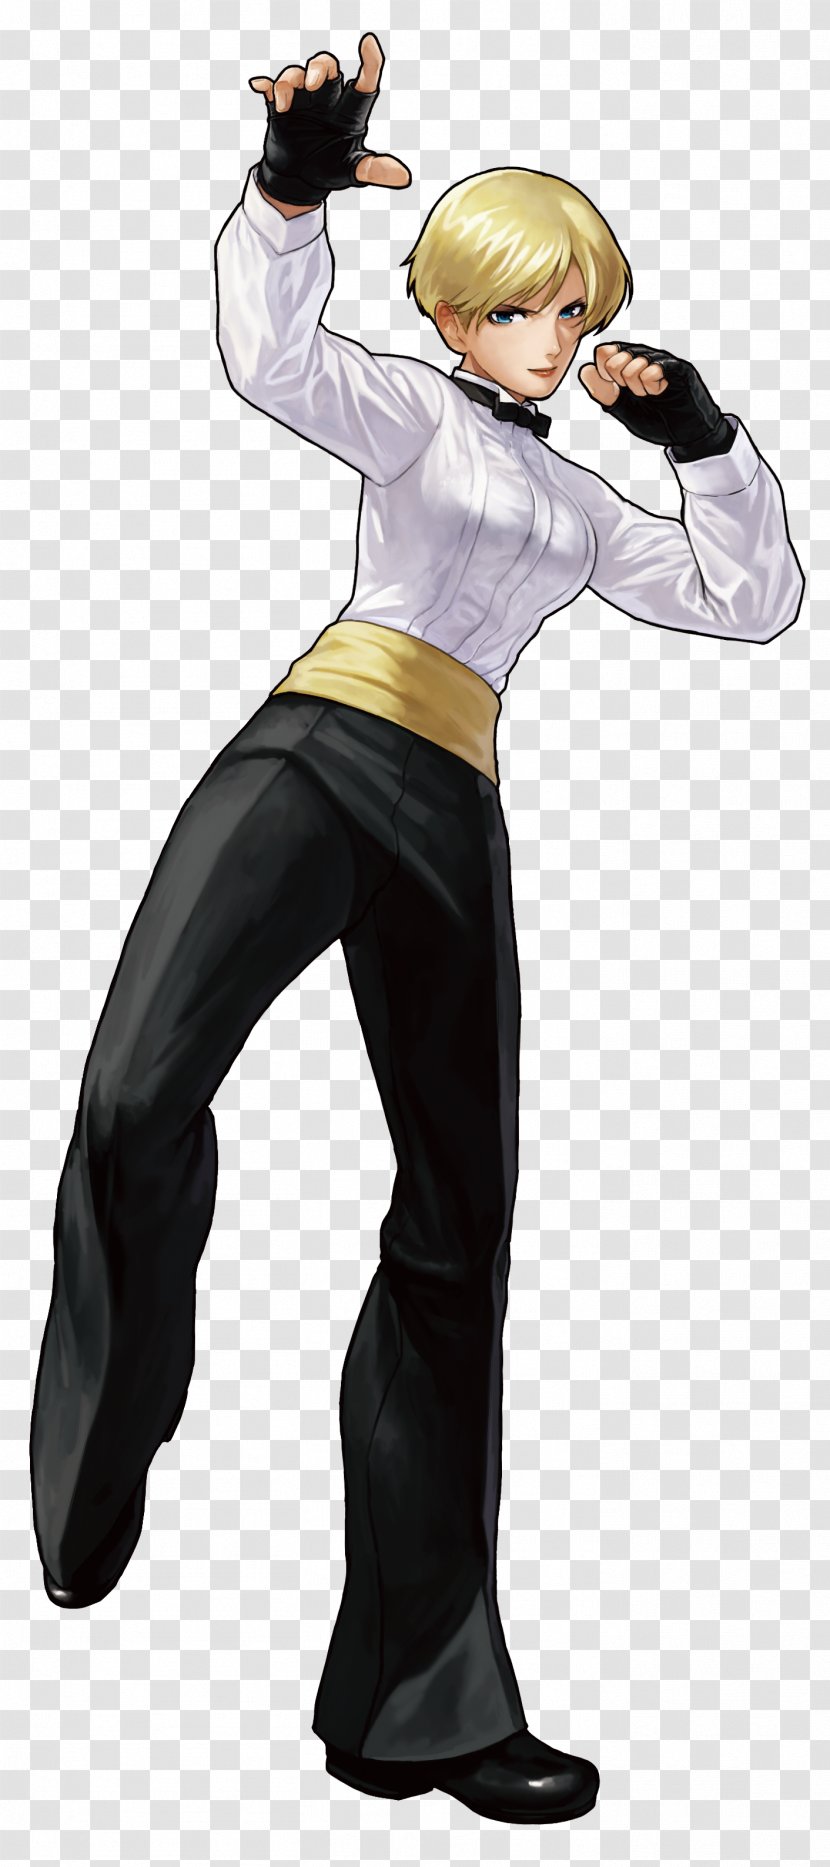 The King Of Fighters XIII 2002 2001 Fatal Fury: - Character Transparent PNG